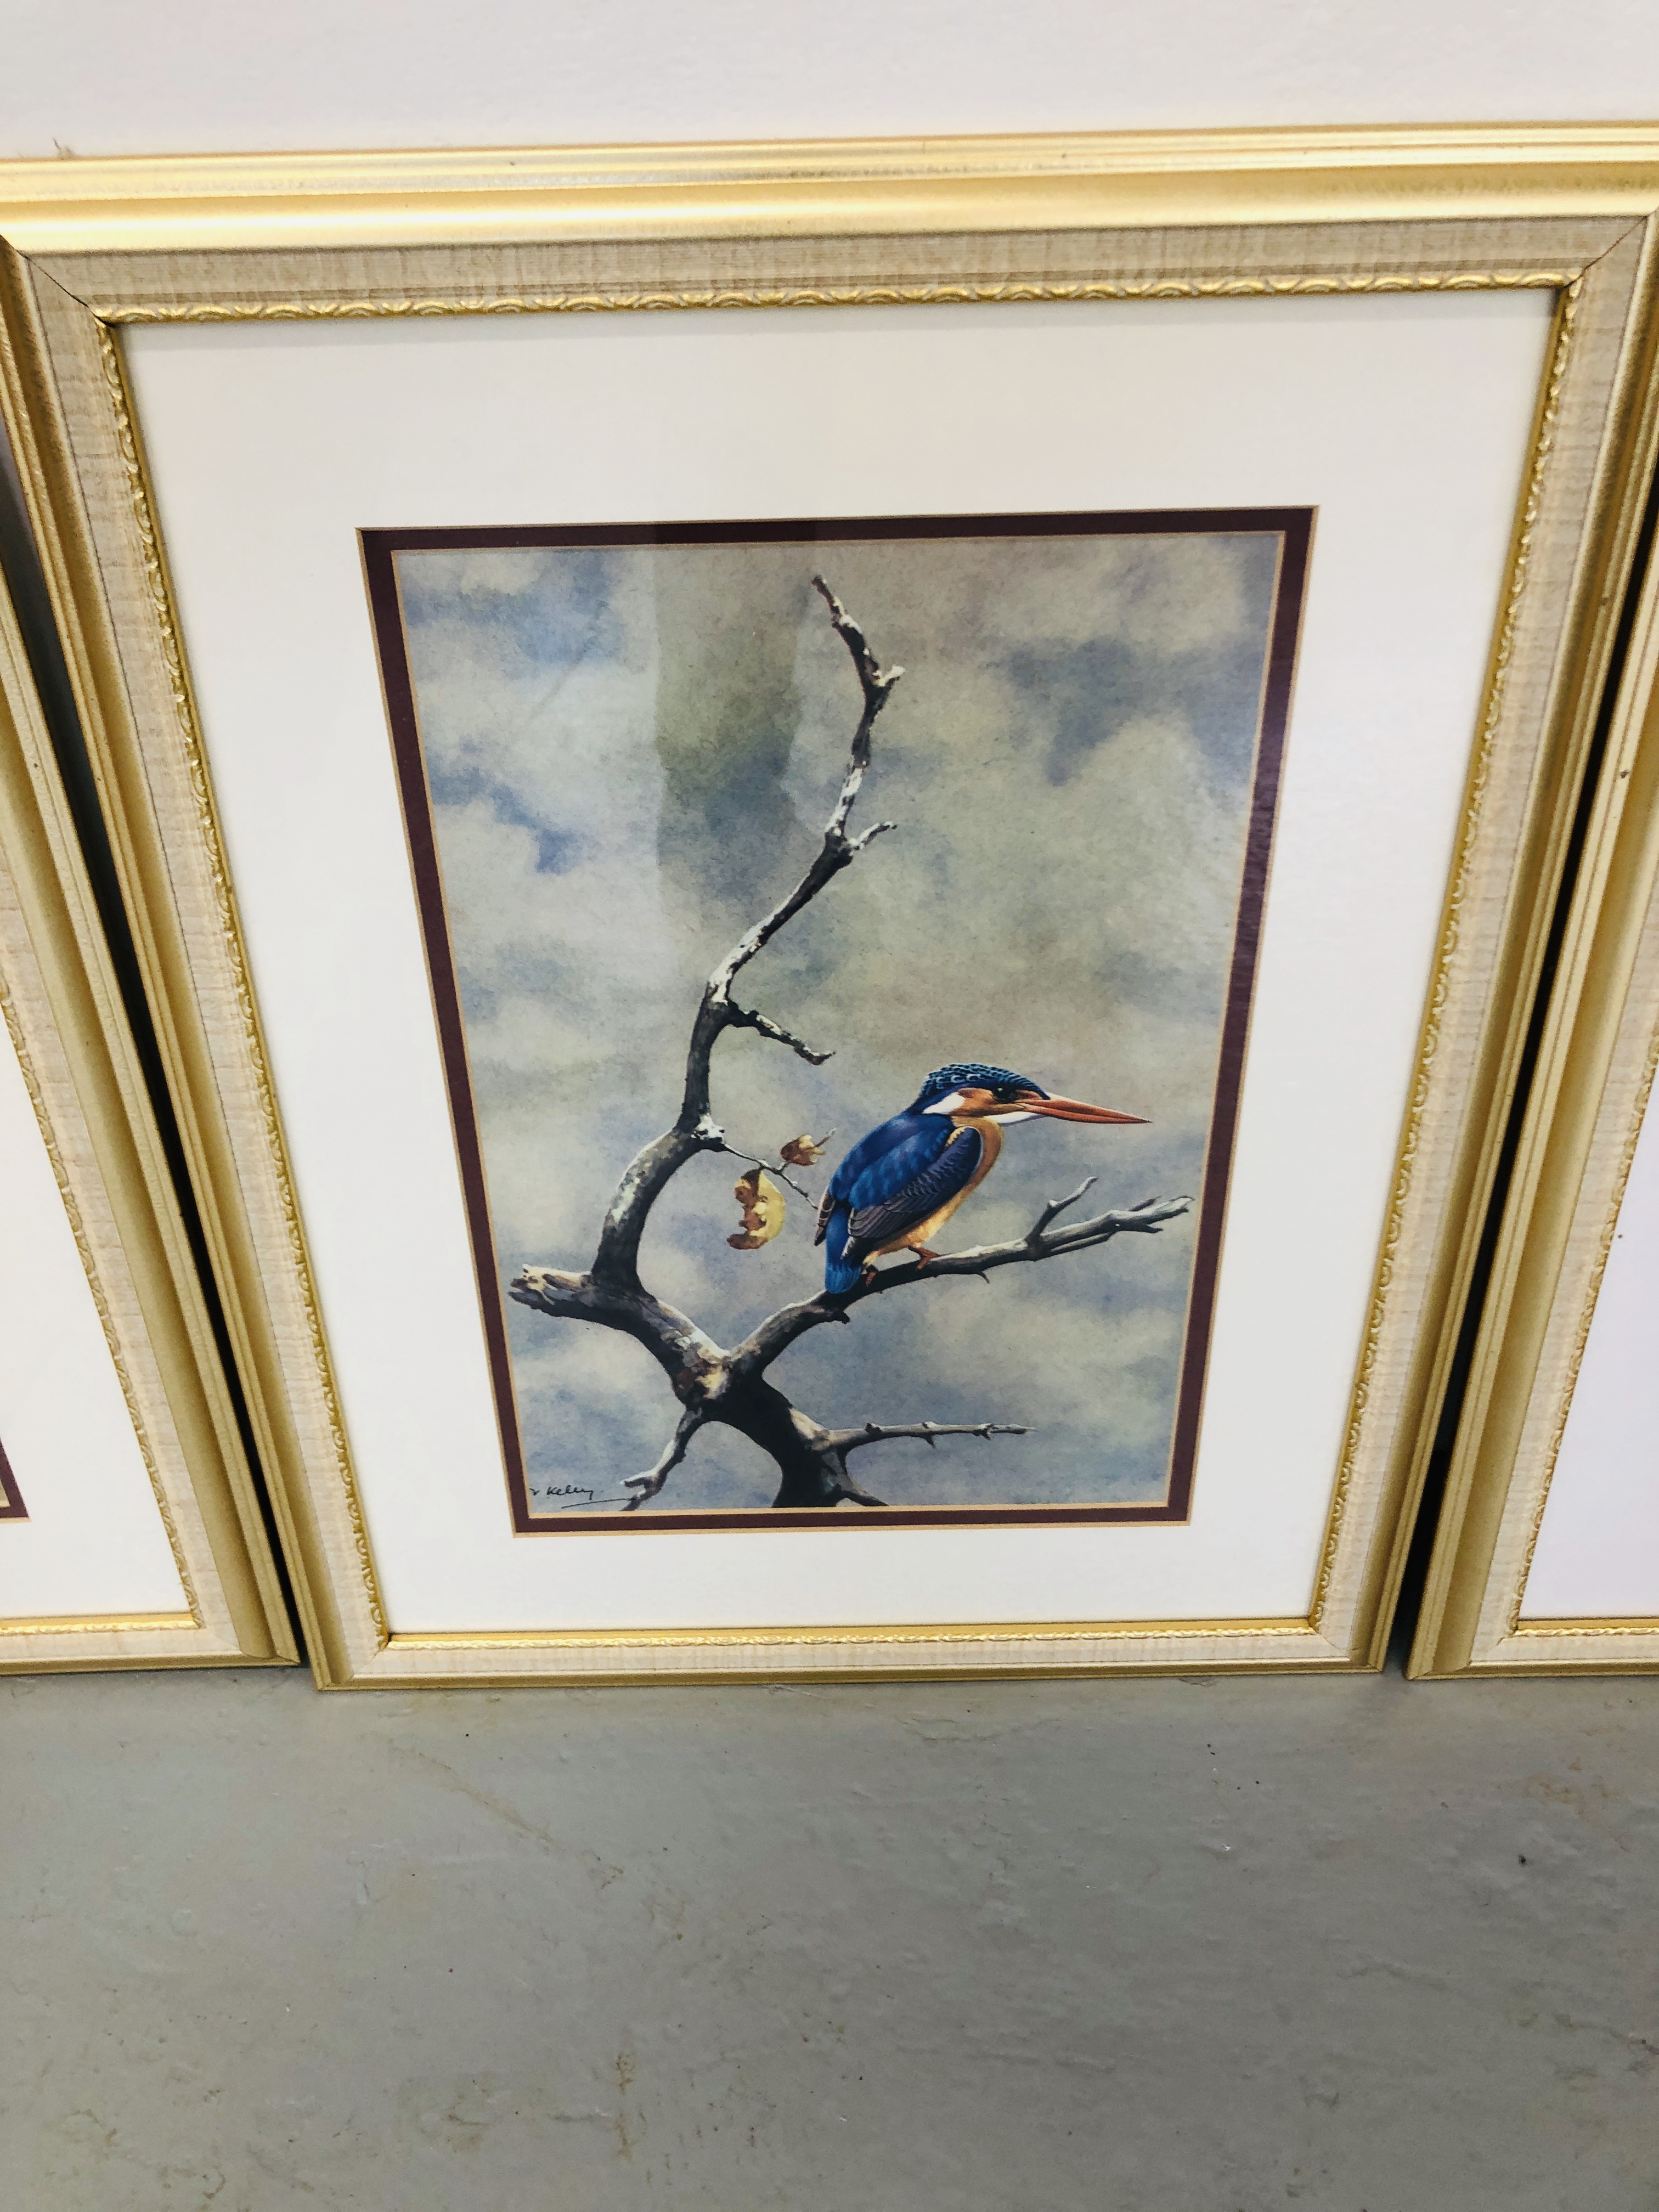 SET OF FRAMED BIRD PRINTS BY "KELLY" - Image 4 of 5